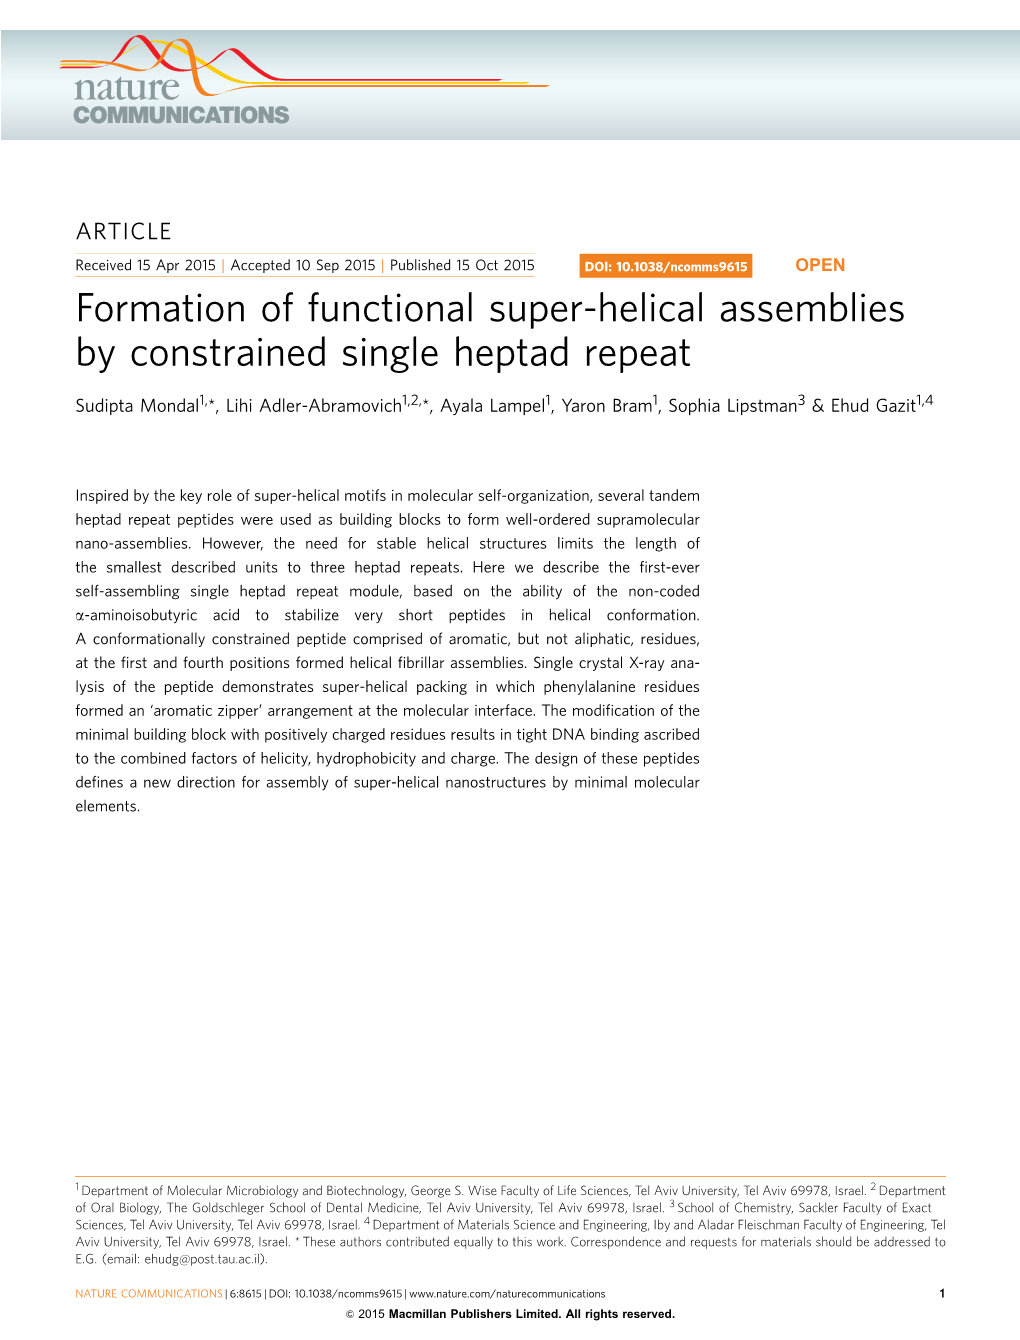 Formation of Functional Super-Helical Assemblies by Constrained Single Heptad Repeat